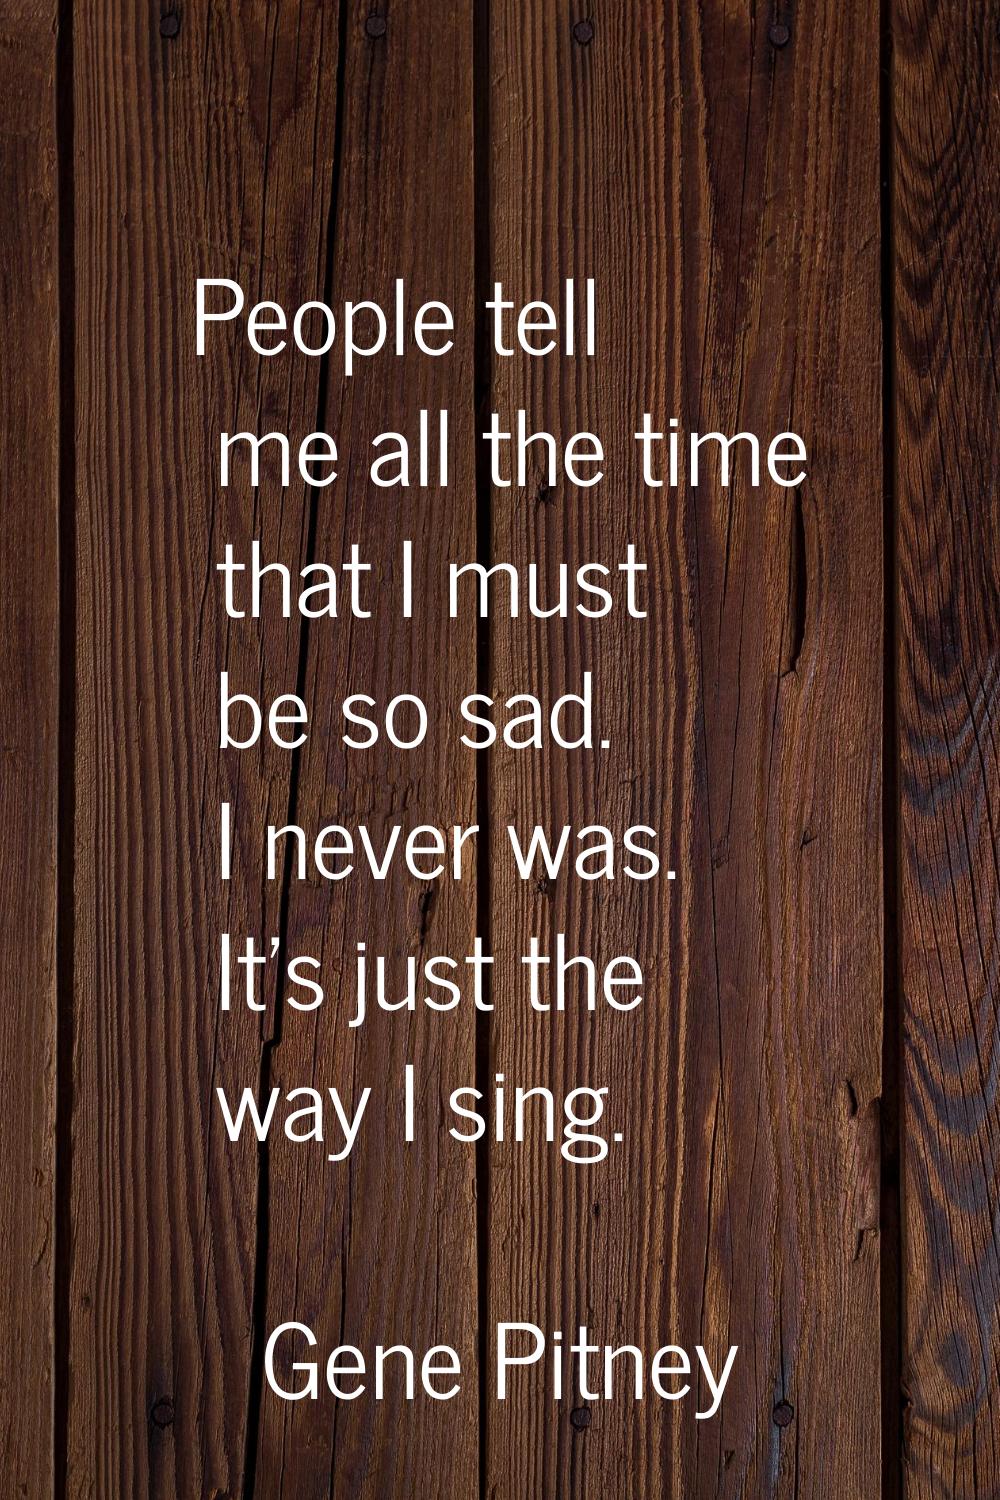 People tell me all the time that I must be so sad. I never was. It's just the way I sing.